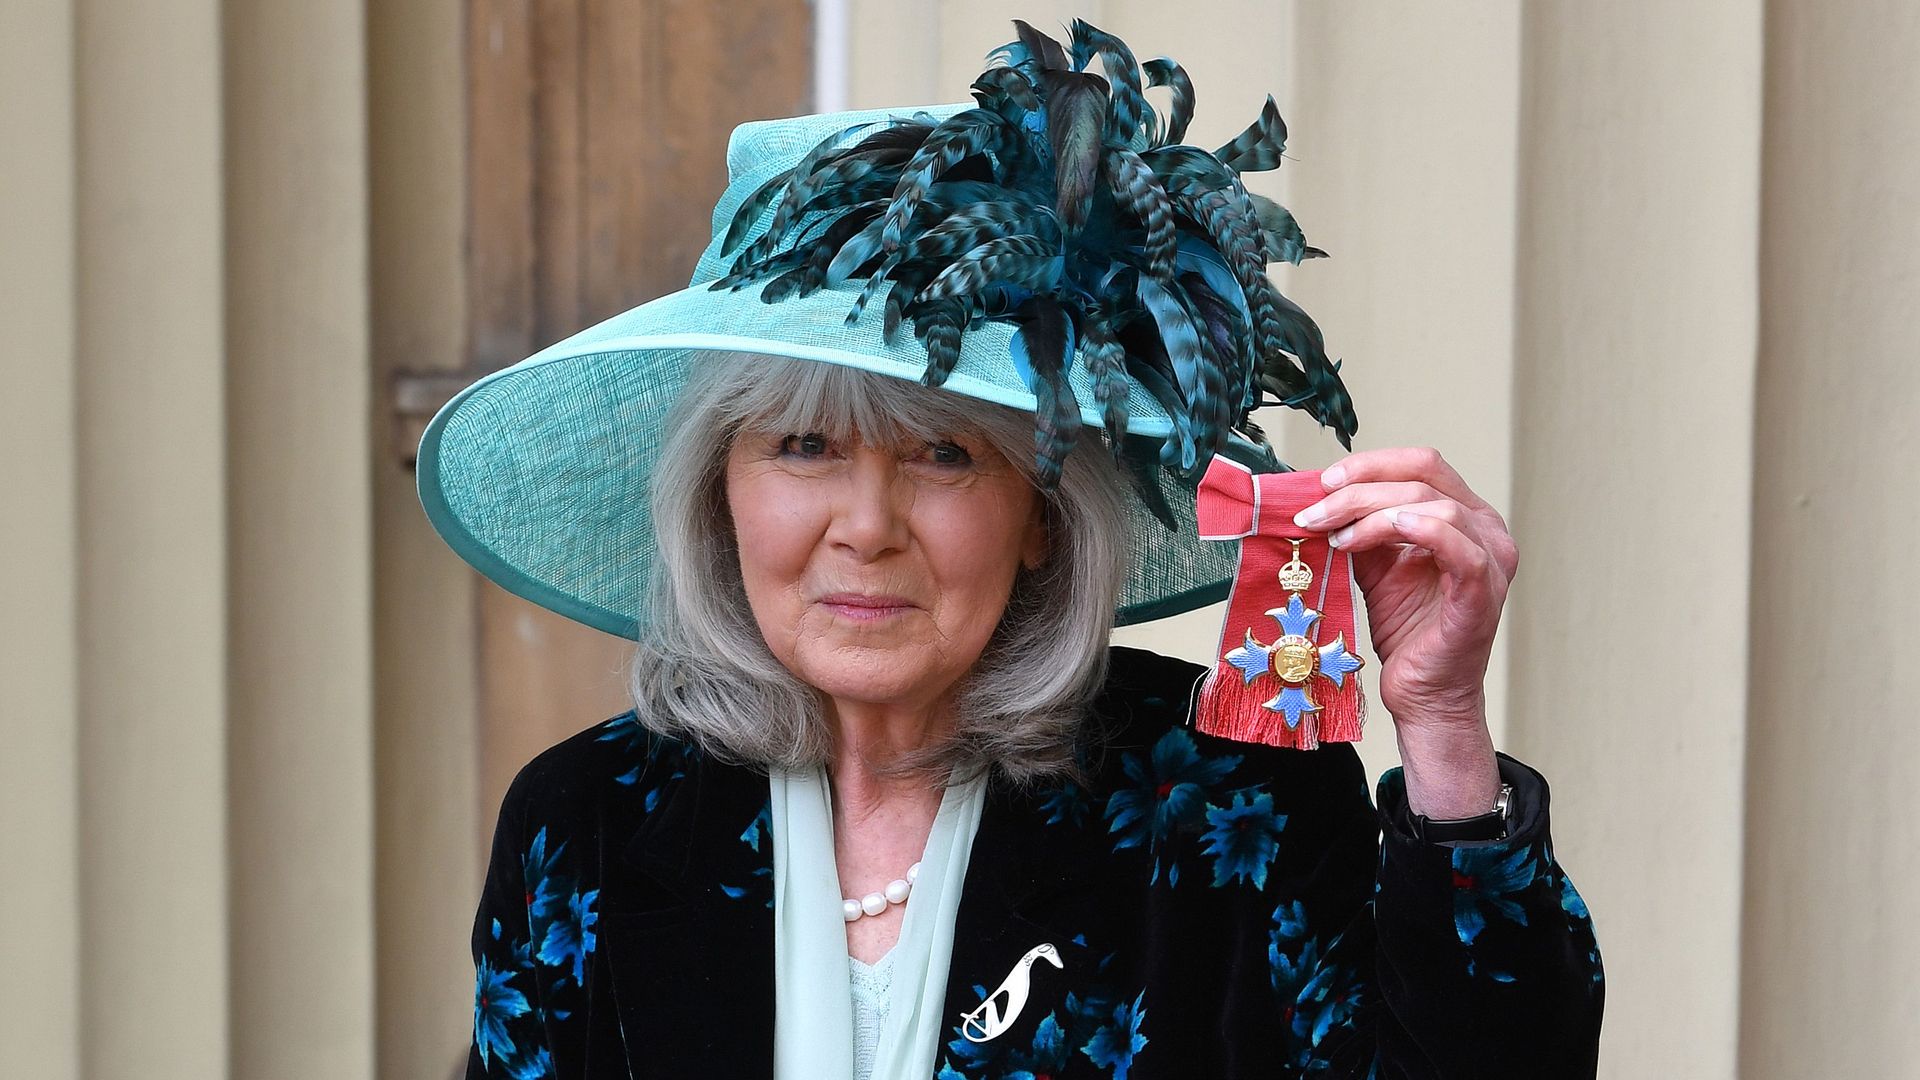 Author Jilly Cooper poses with her medal after she was appointed a Commander of the Order of the British Empire (CBE) at an investiture ceremony at Buckingham Palace in London 